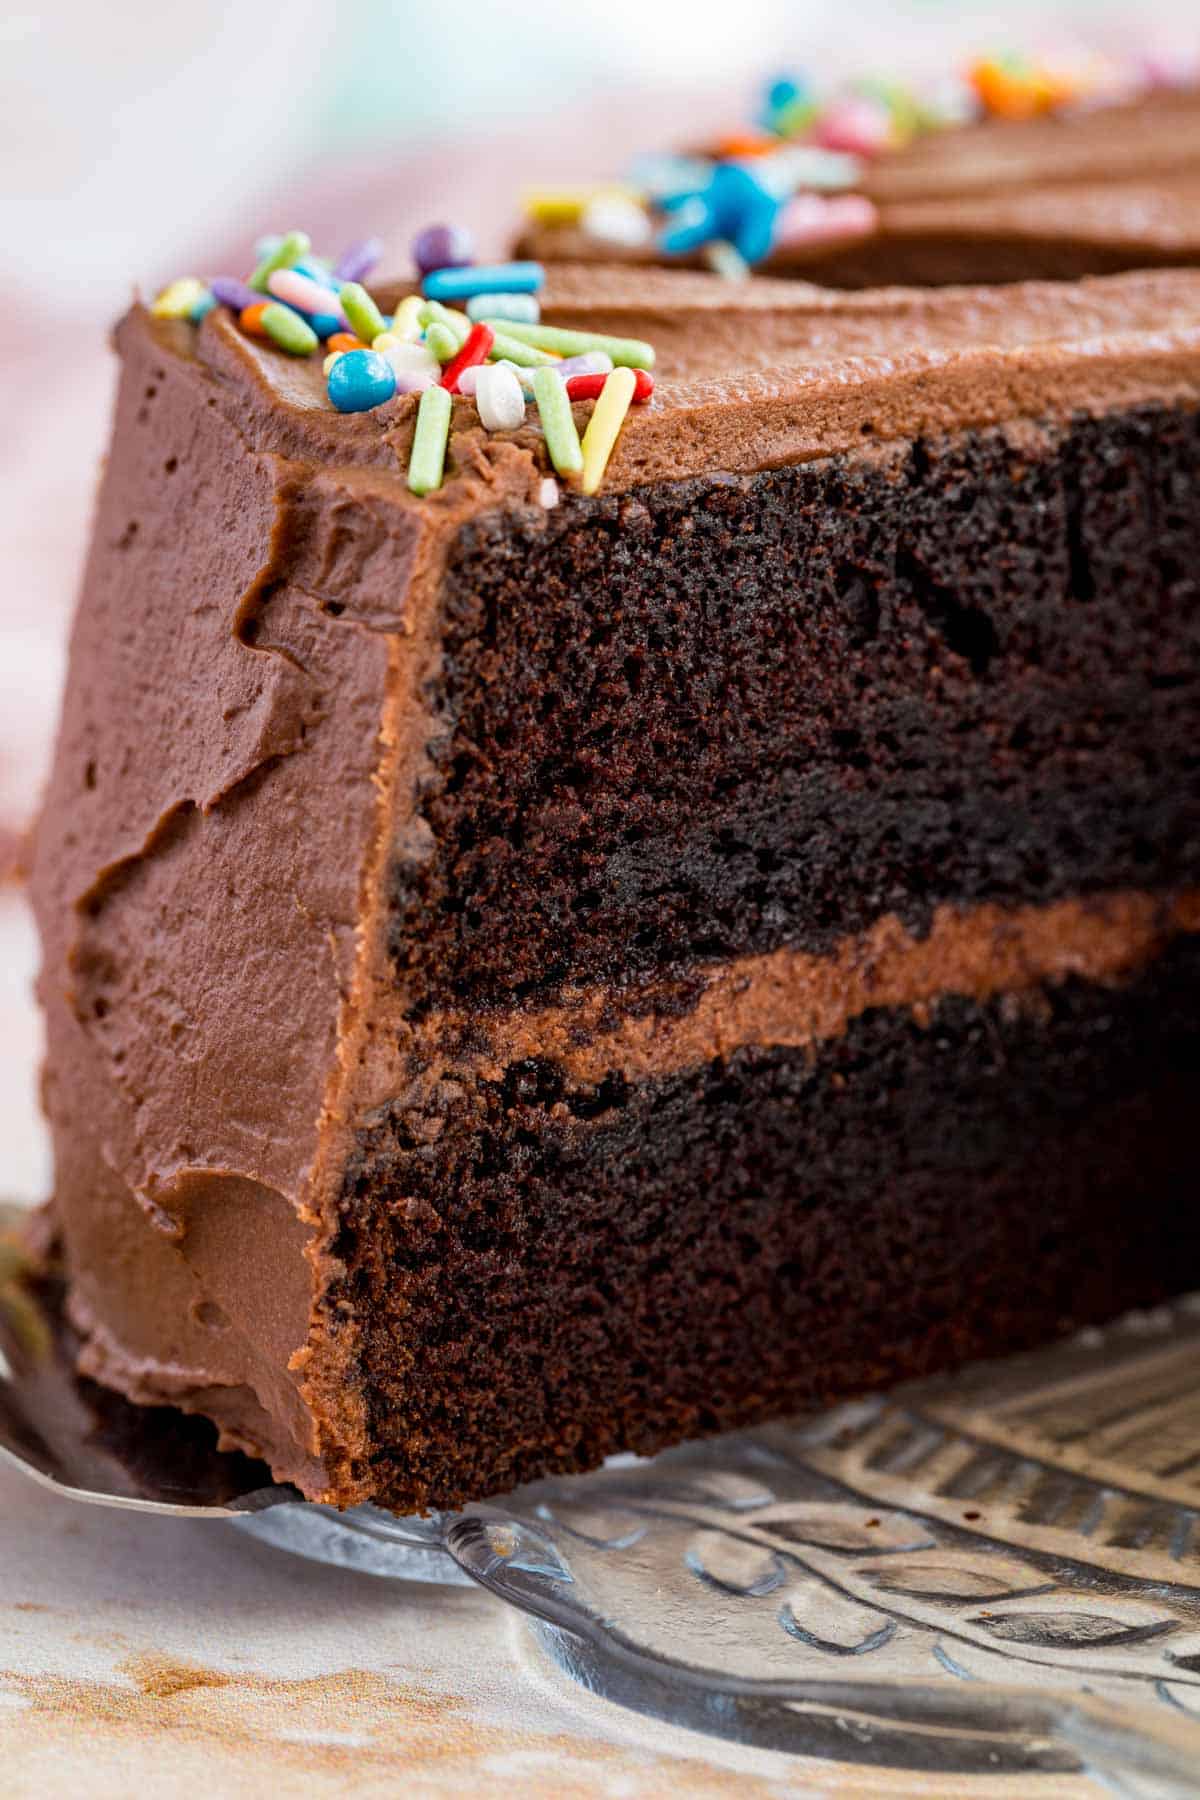 Close up of a slice of gluten-free chocolate layer cake being served from the full cake.